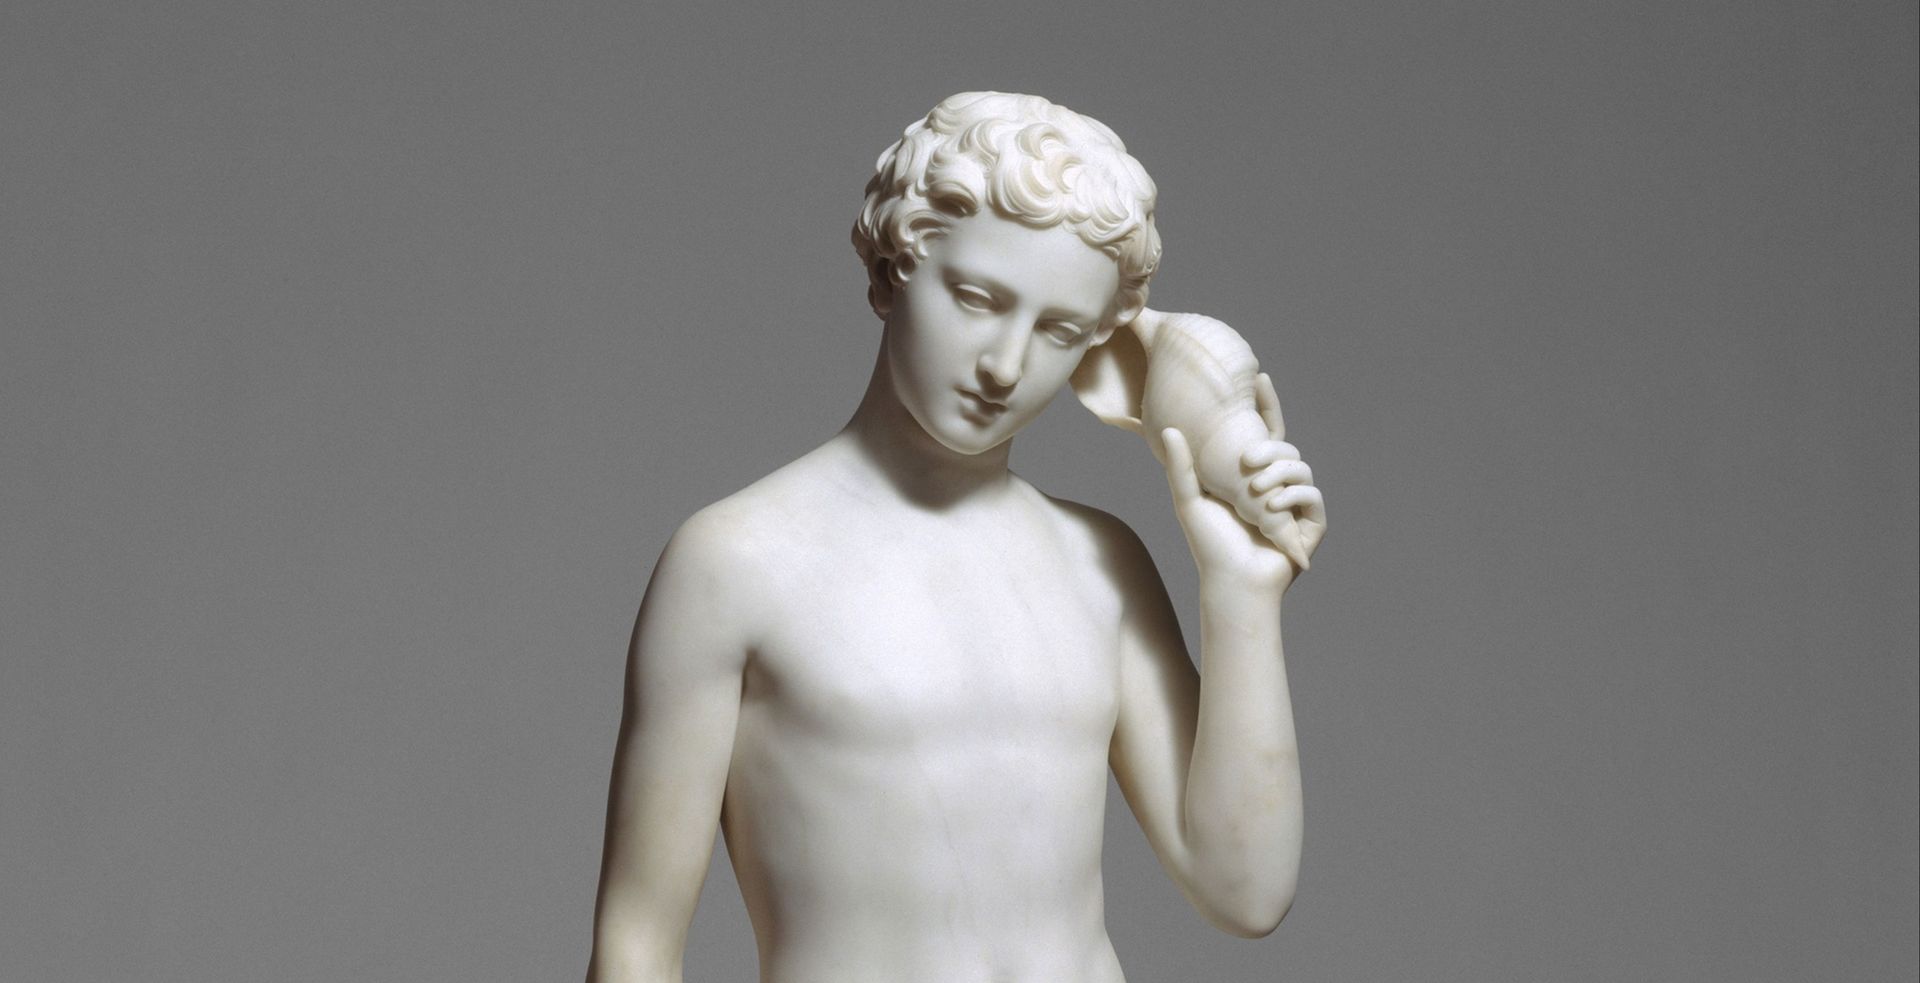 A white marble carving of a muscular shirtless boy with curly hair holding a conch shell up to his ear and listening.